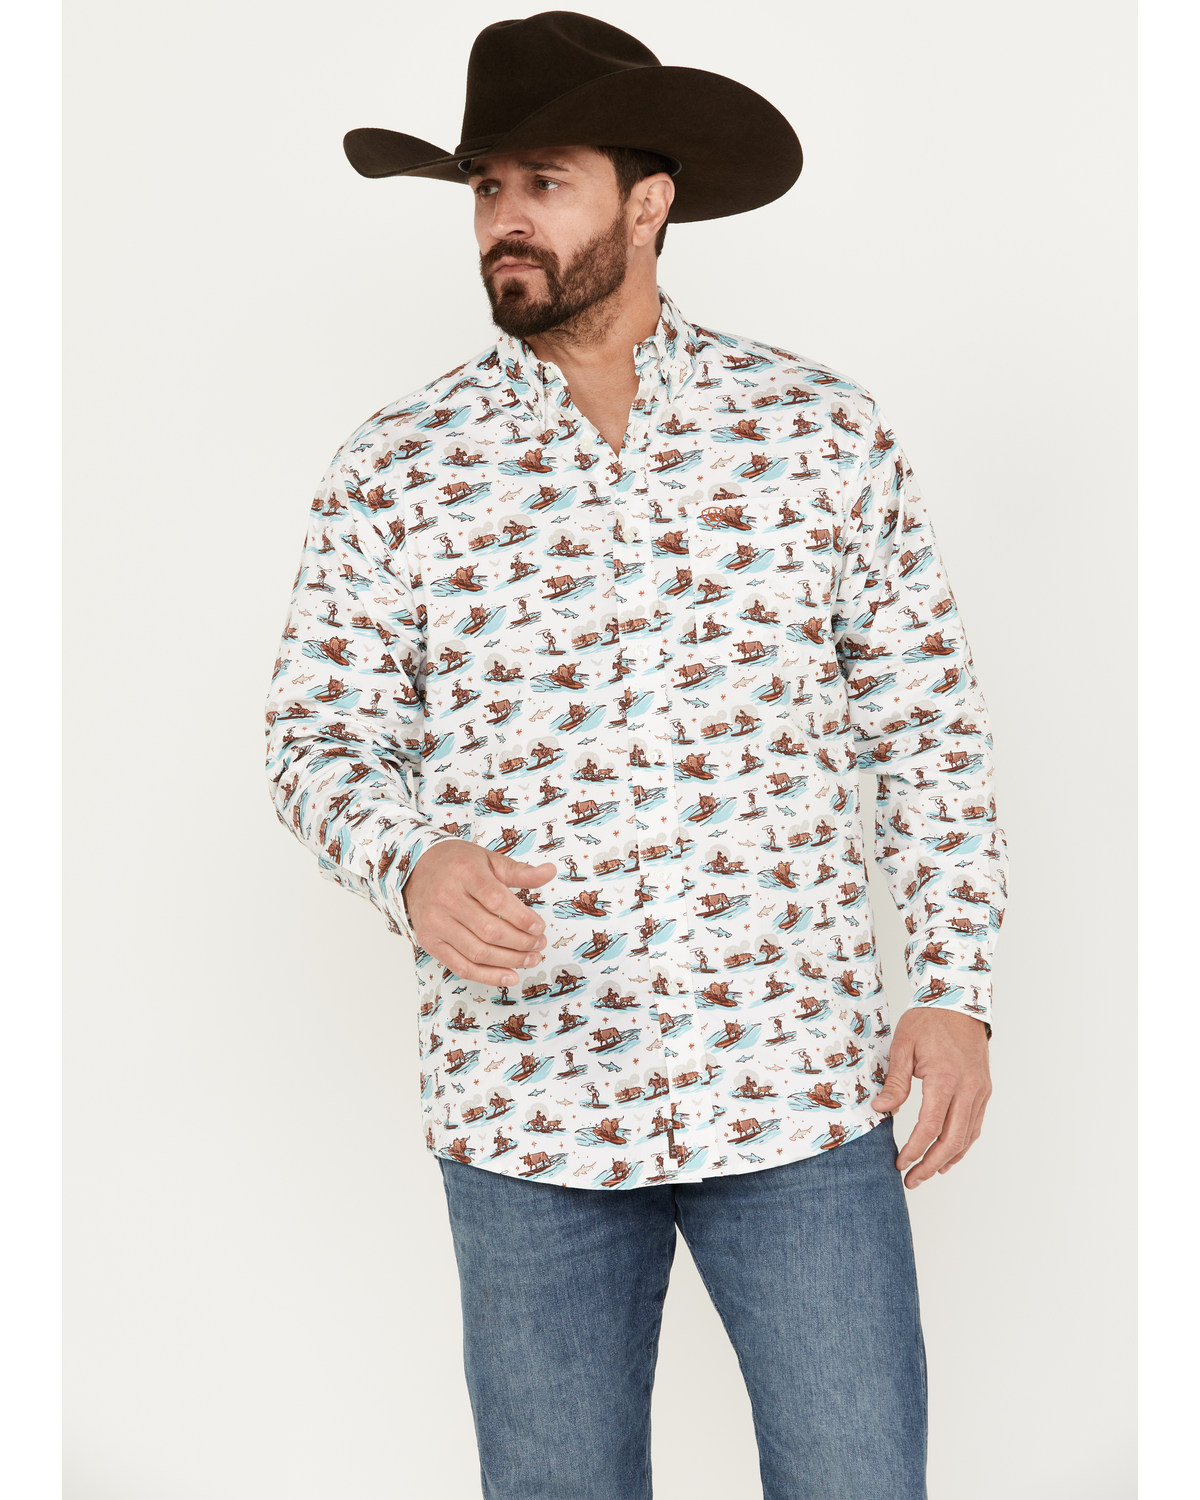 Ariat Men's Surfing Longhorn Aloha Stretch Classic Fit Western Shirt